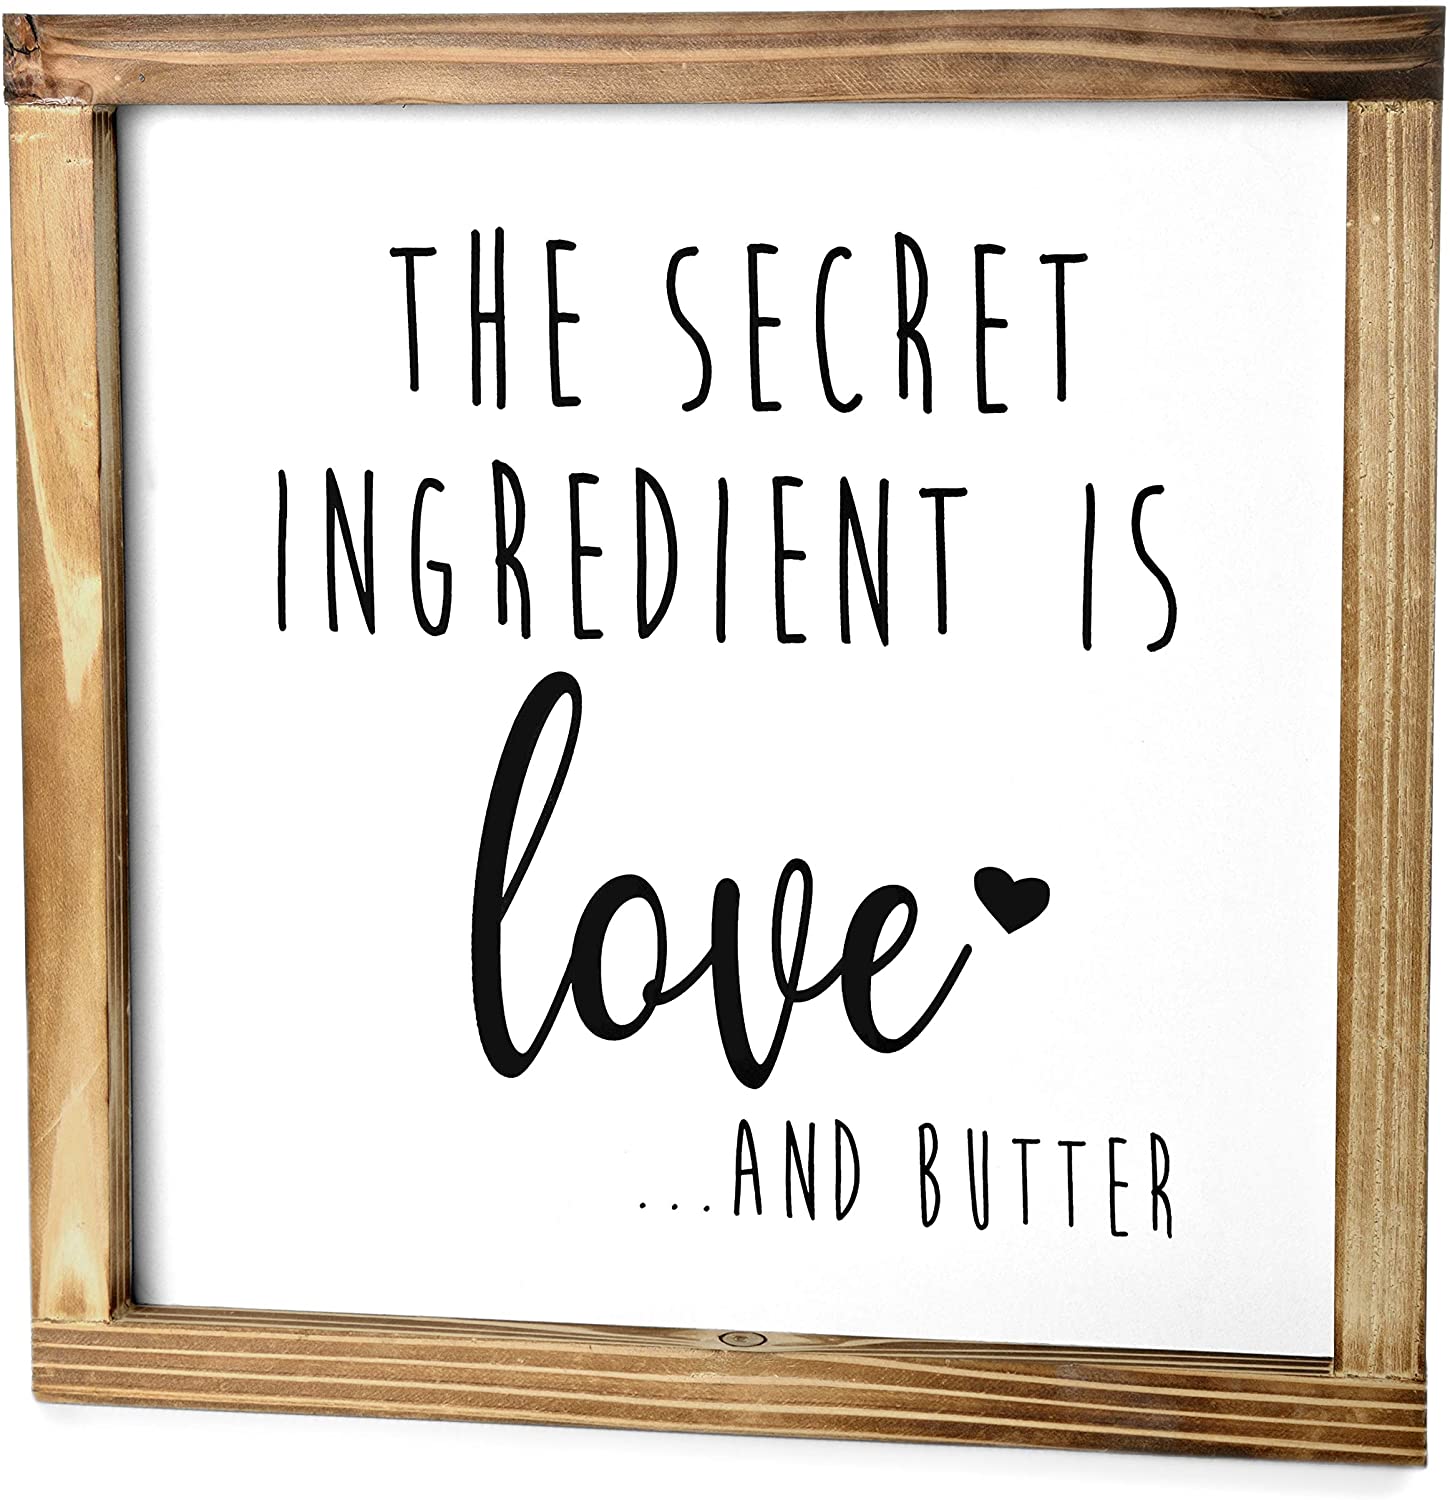 The Secret Ingredient is Always Love and Butter Sign - Funny Kitchen Sign - Modern Farmhouse Kitchen Decor, Kitchen Wall Decor, Country Kitchen Decor with Solid Wood Frame 12x12 Inch